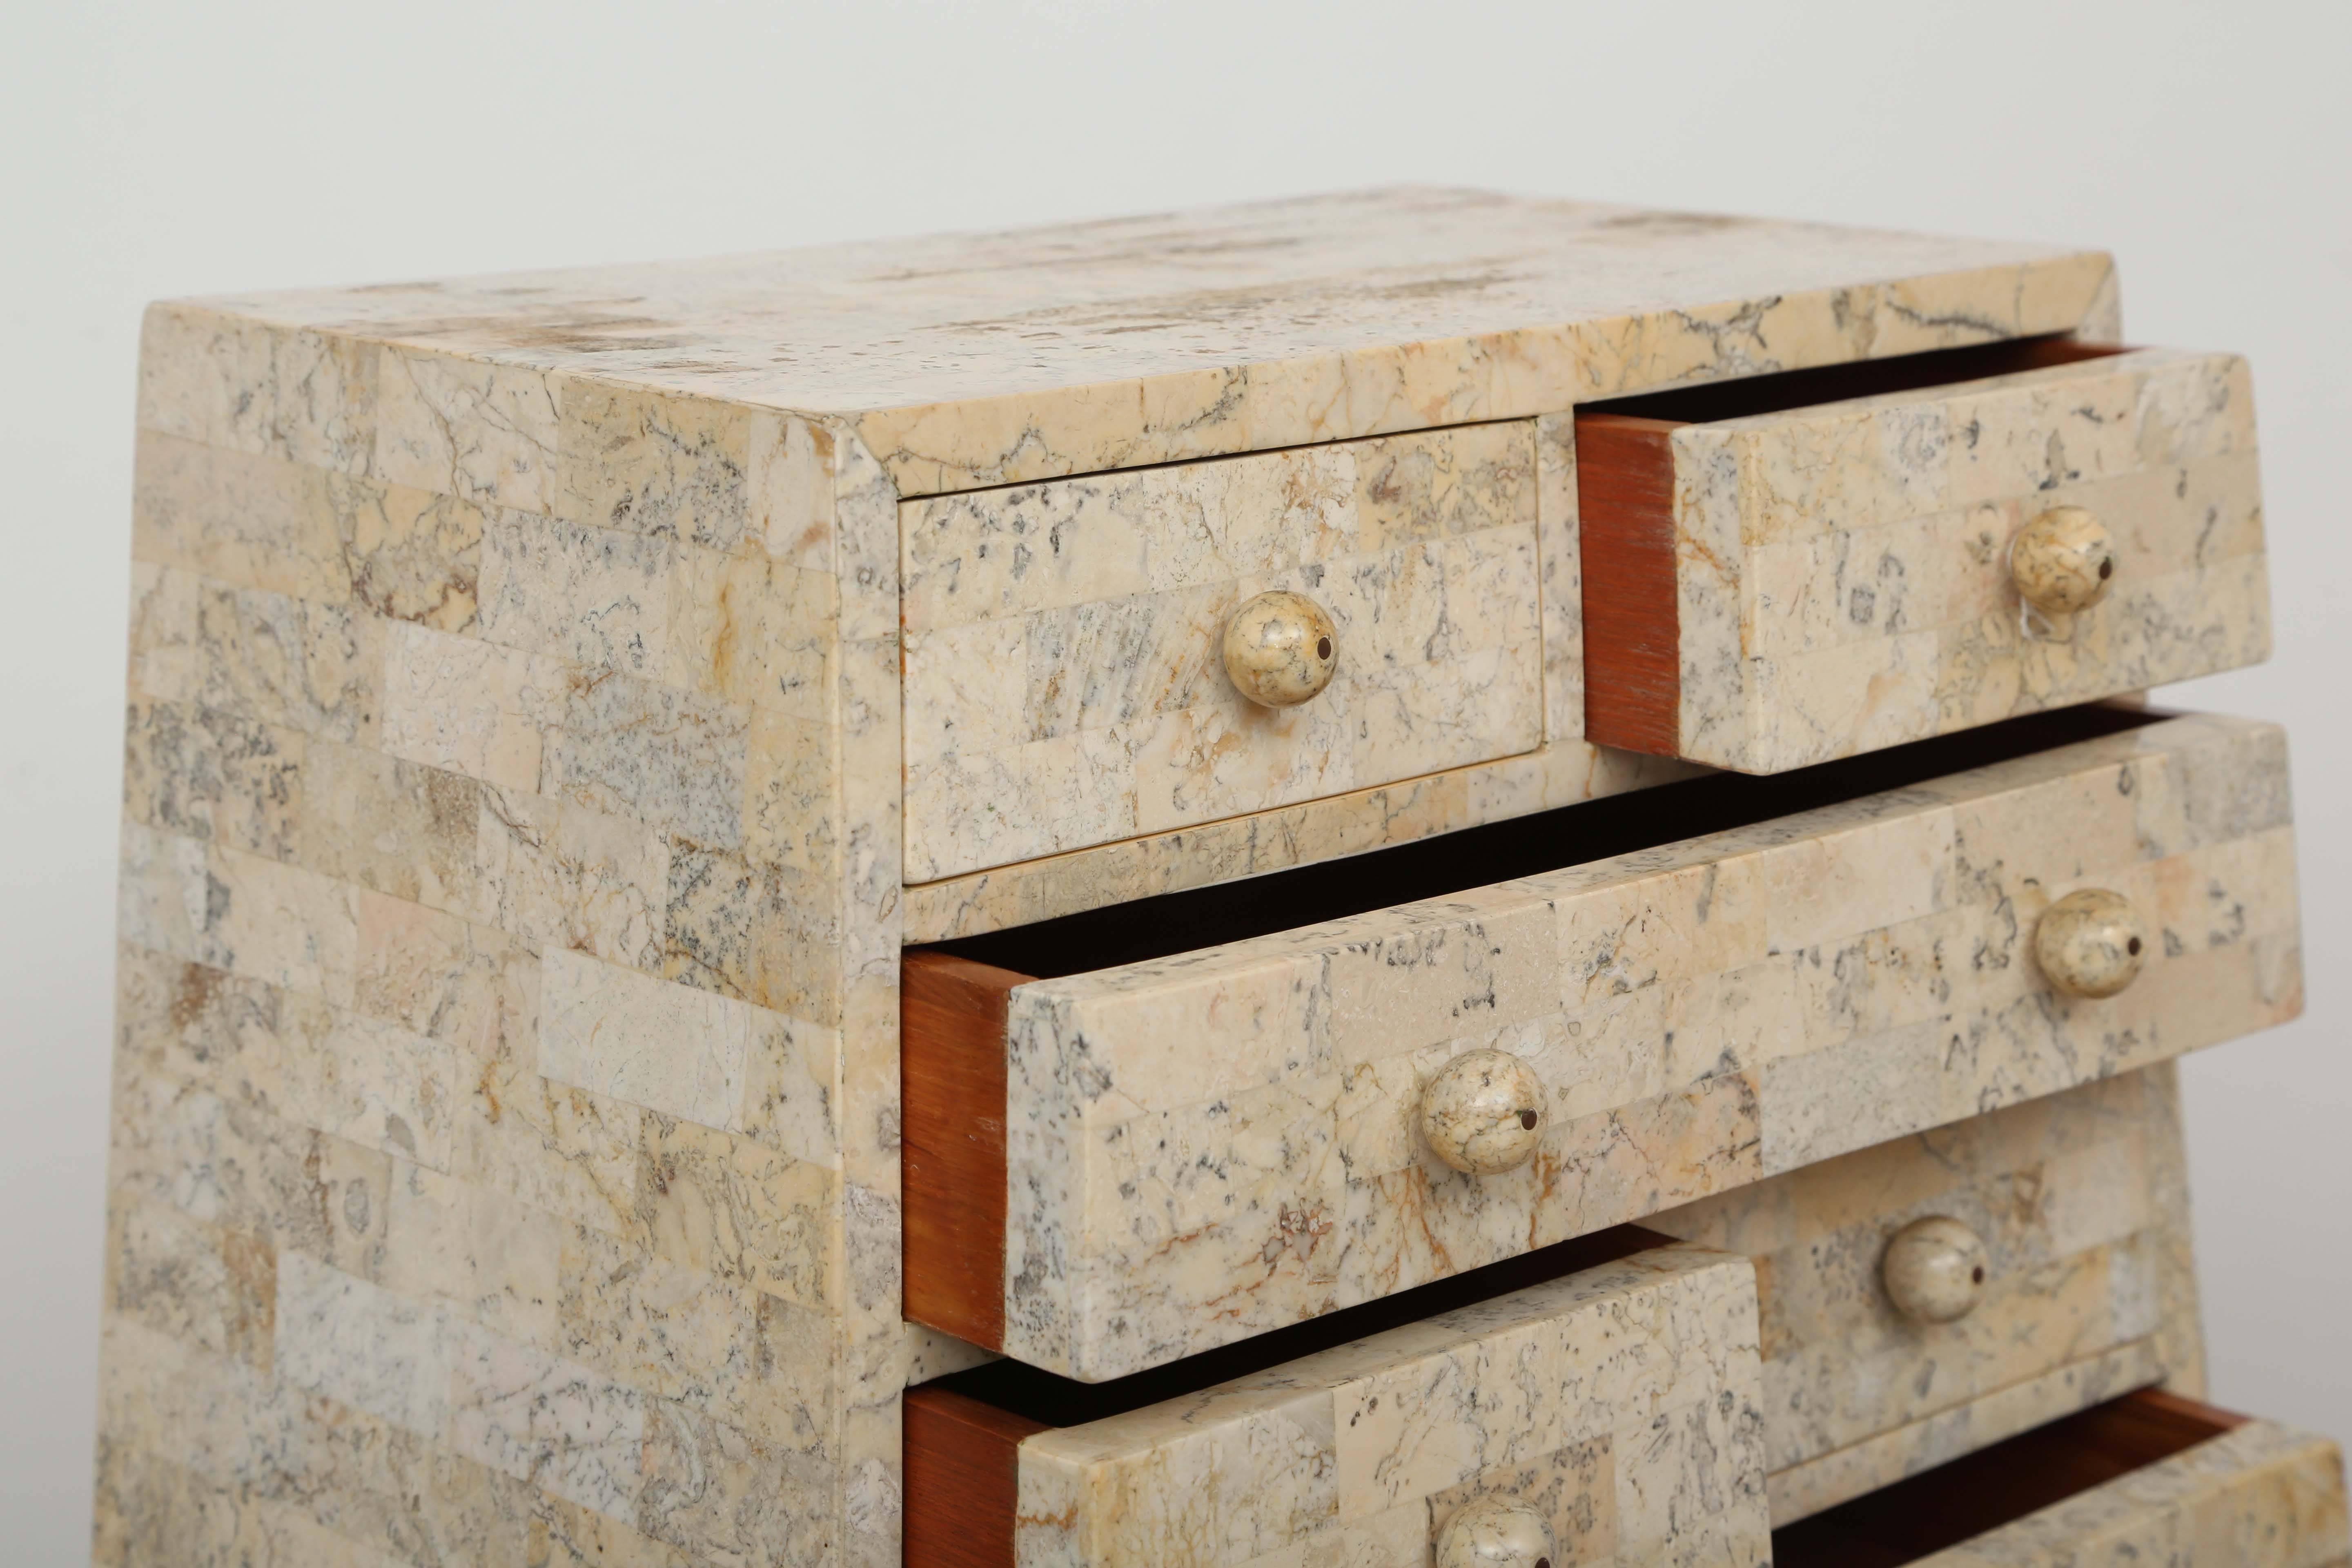 American Tall Pyramidal Tesselated Stone Tile Cabinet by Maitland Smith